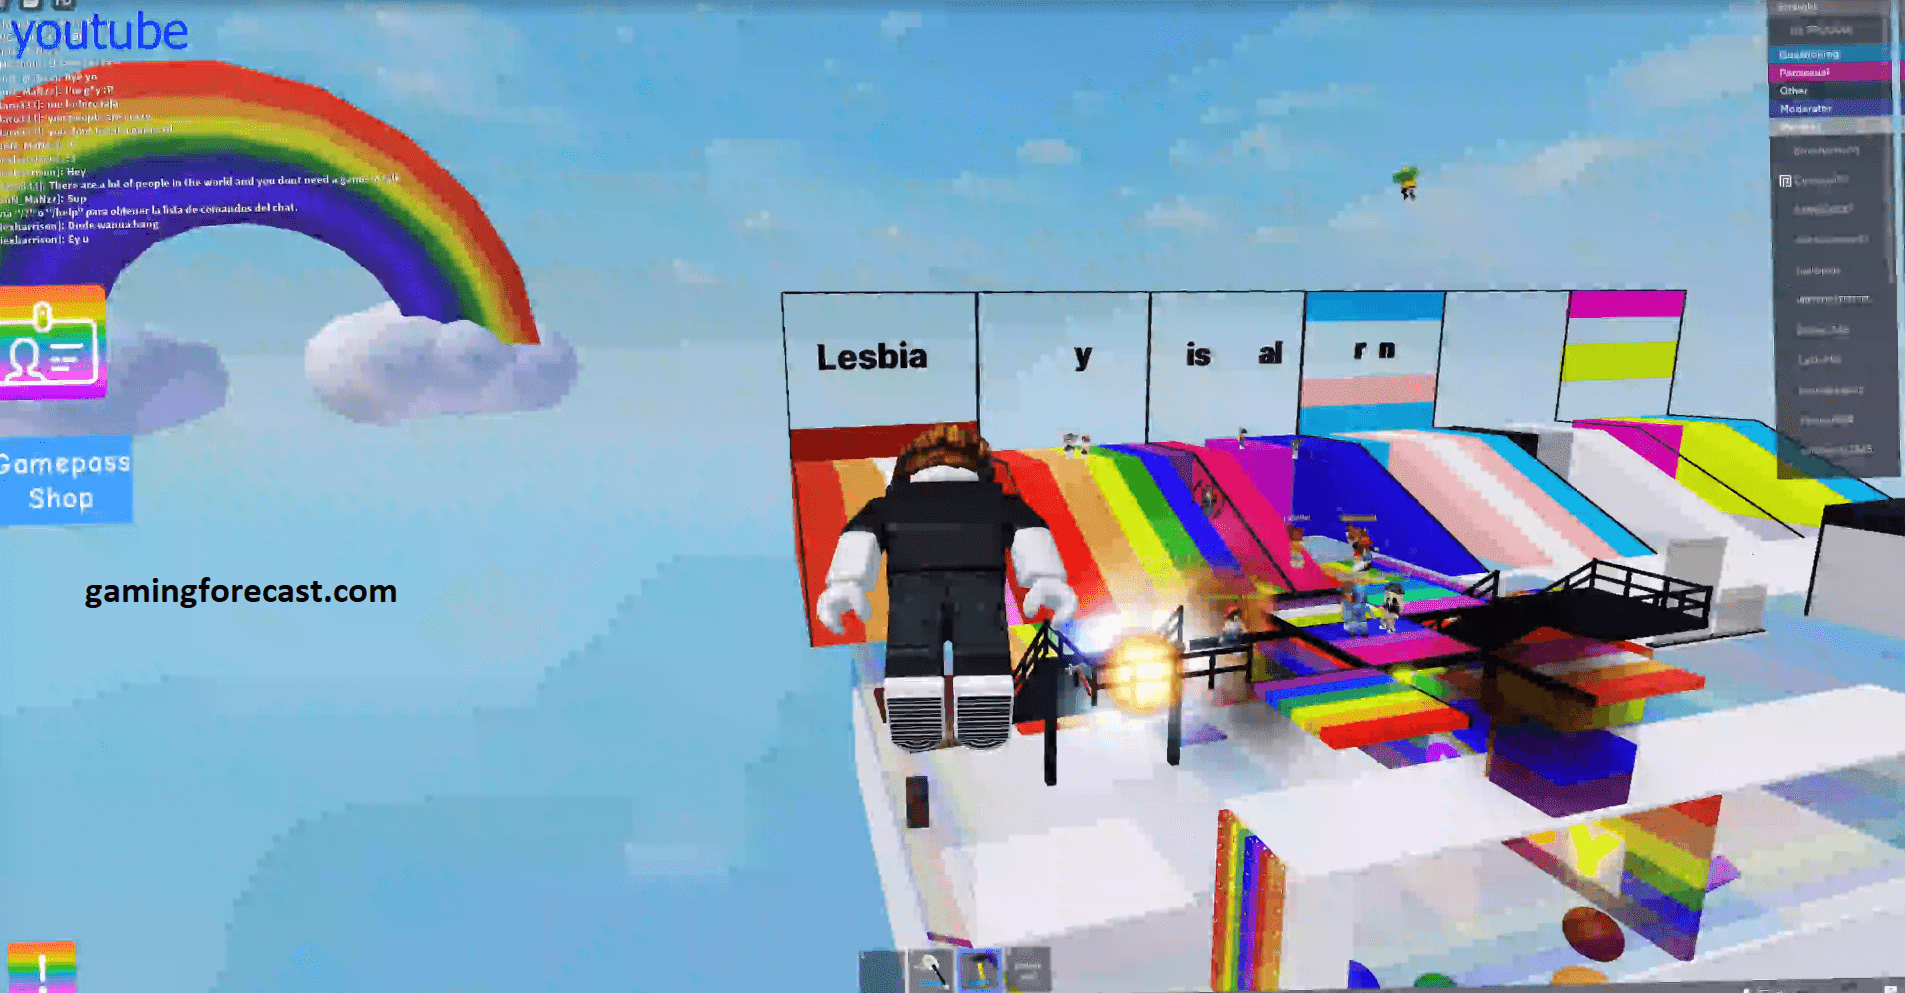 Roblox Hack Download Pc Destroy Lobby Fly Aimbot Scripts 2021 Gaming Forecast Download Free Online Game Hacks - roblox fly hacking